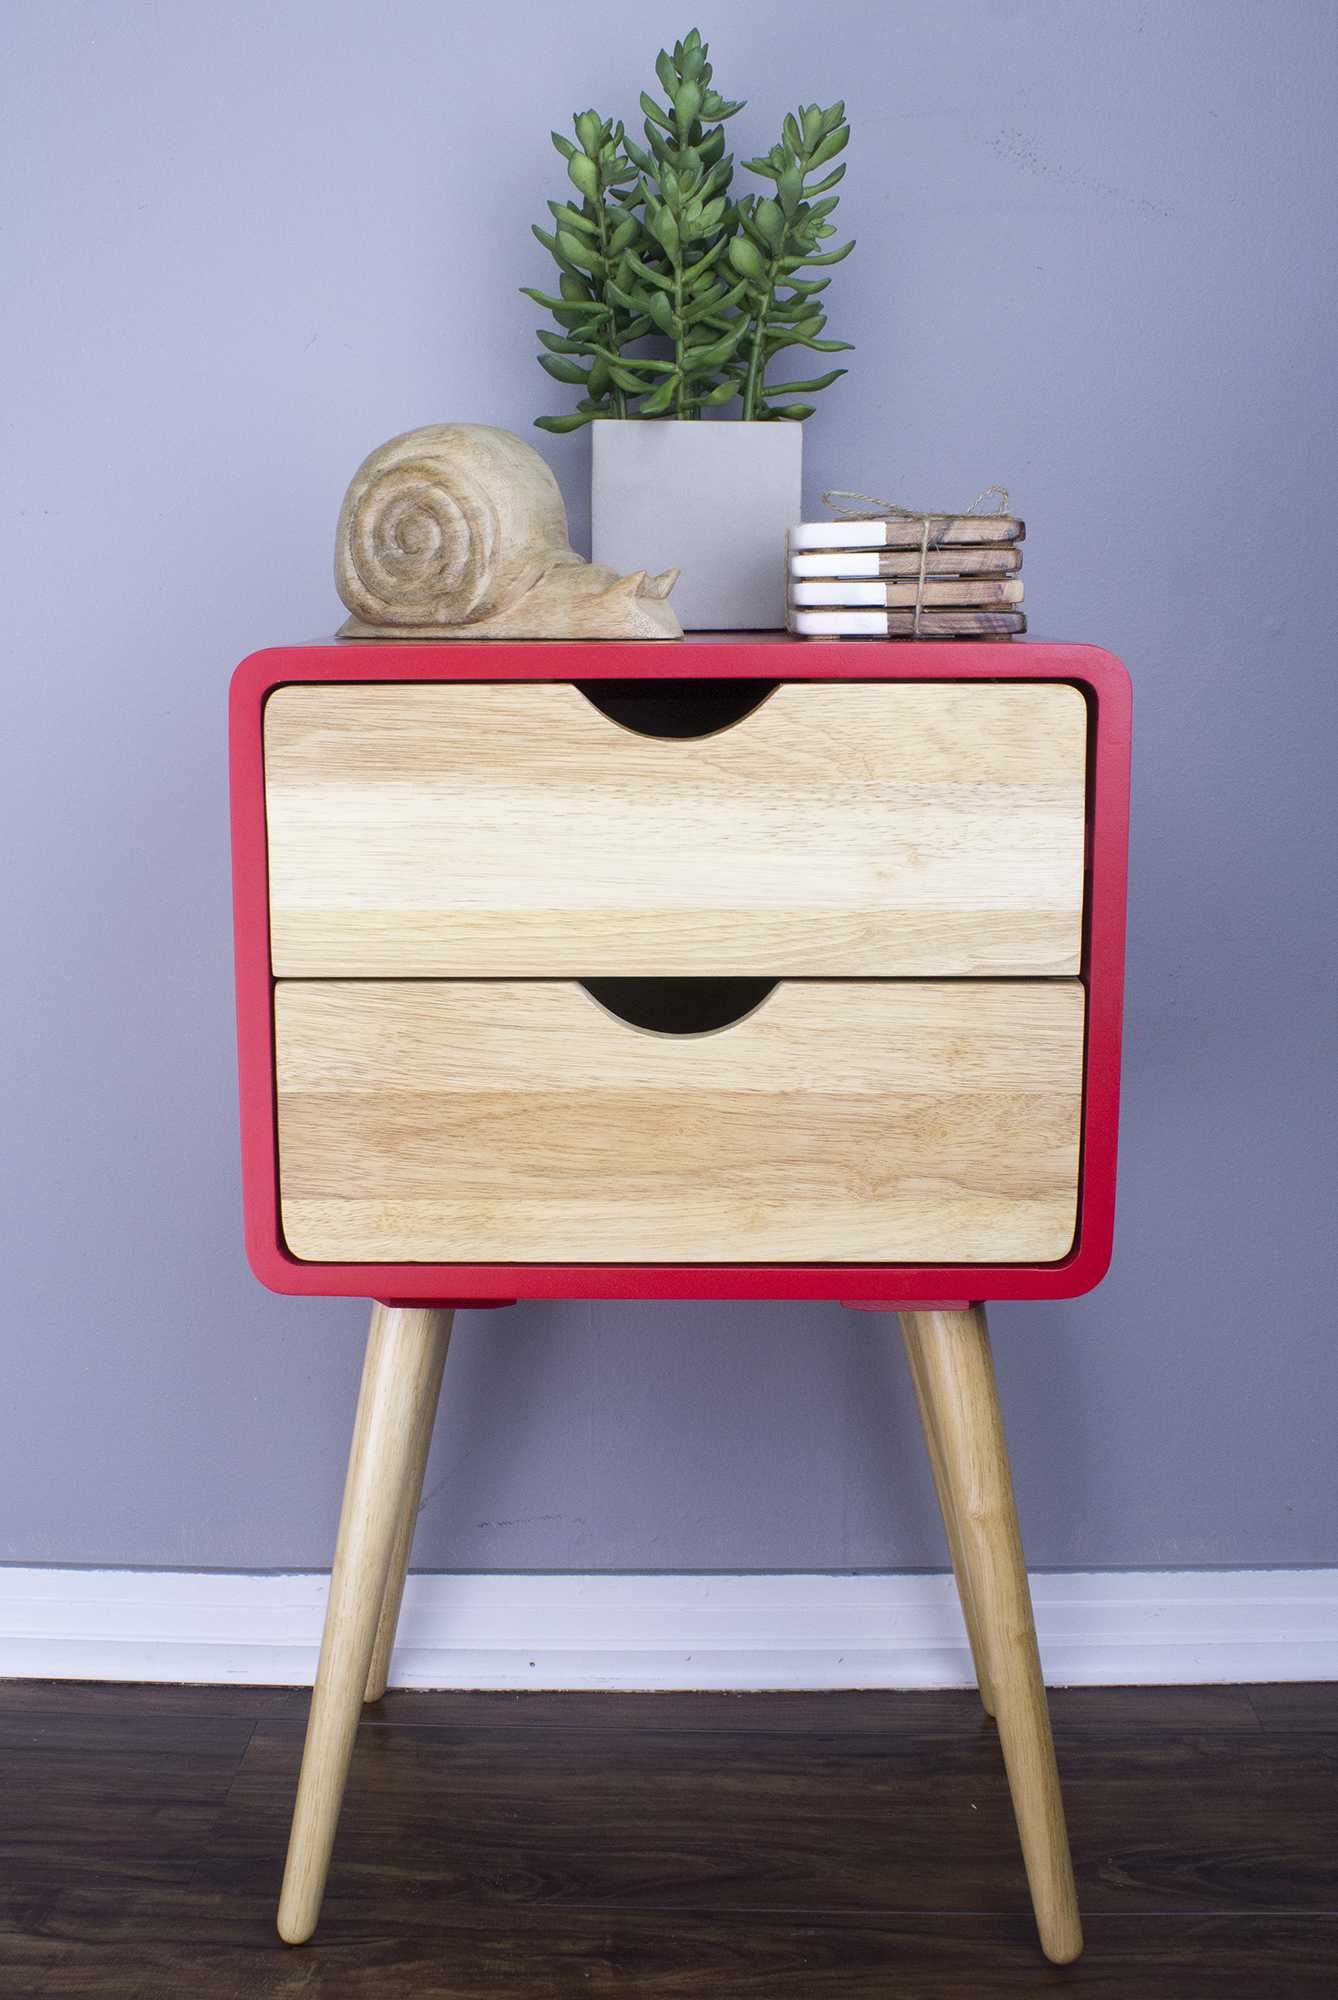 16" X 12" X 26" Red MDF Wood End Table with Drawers